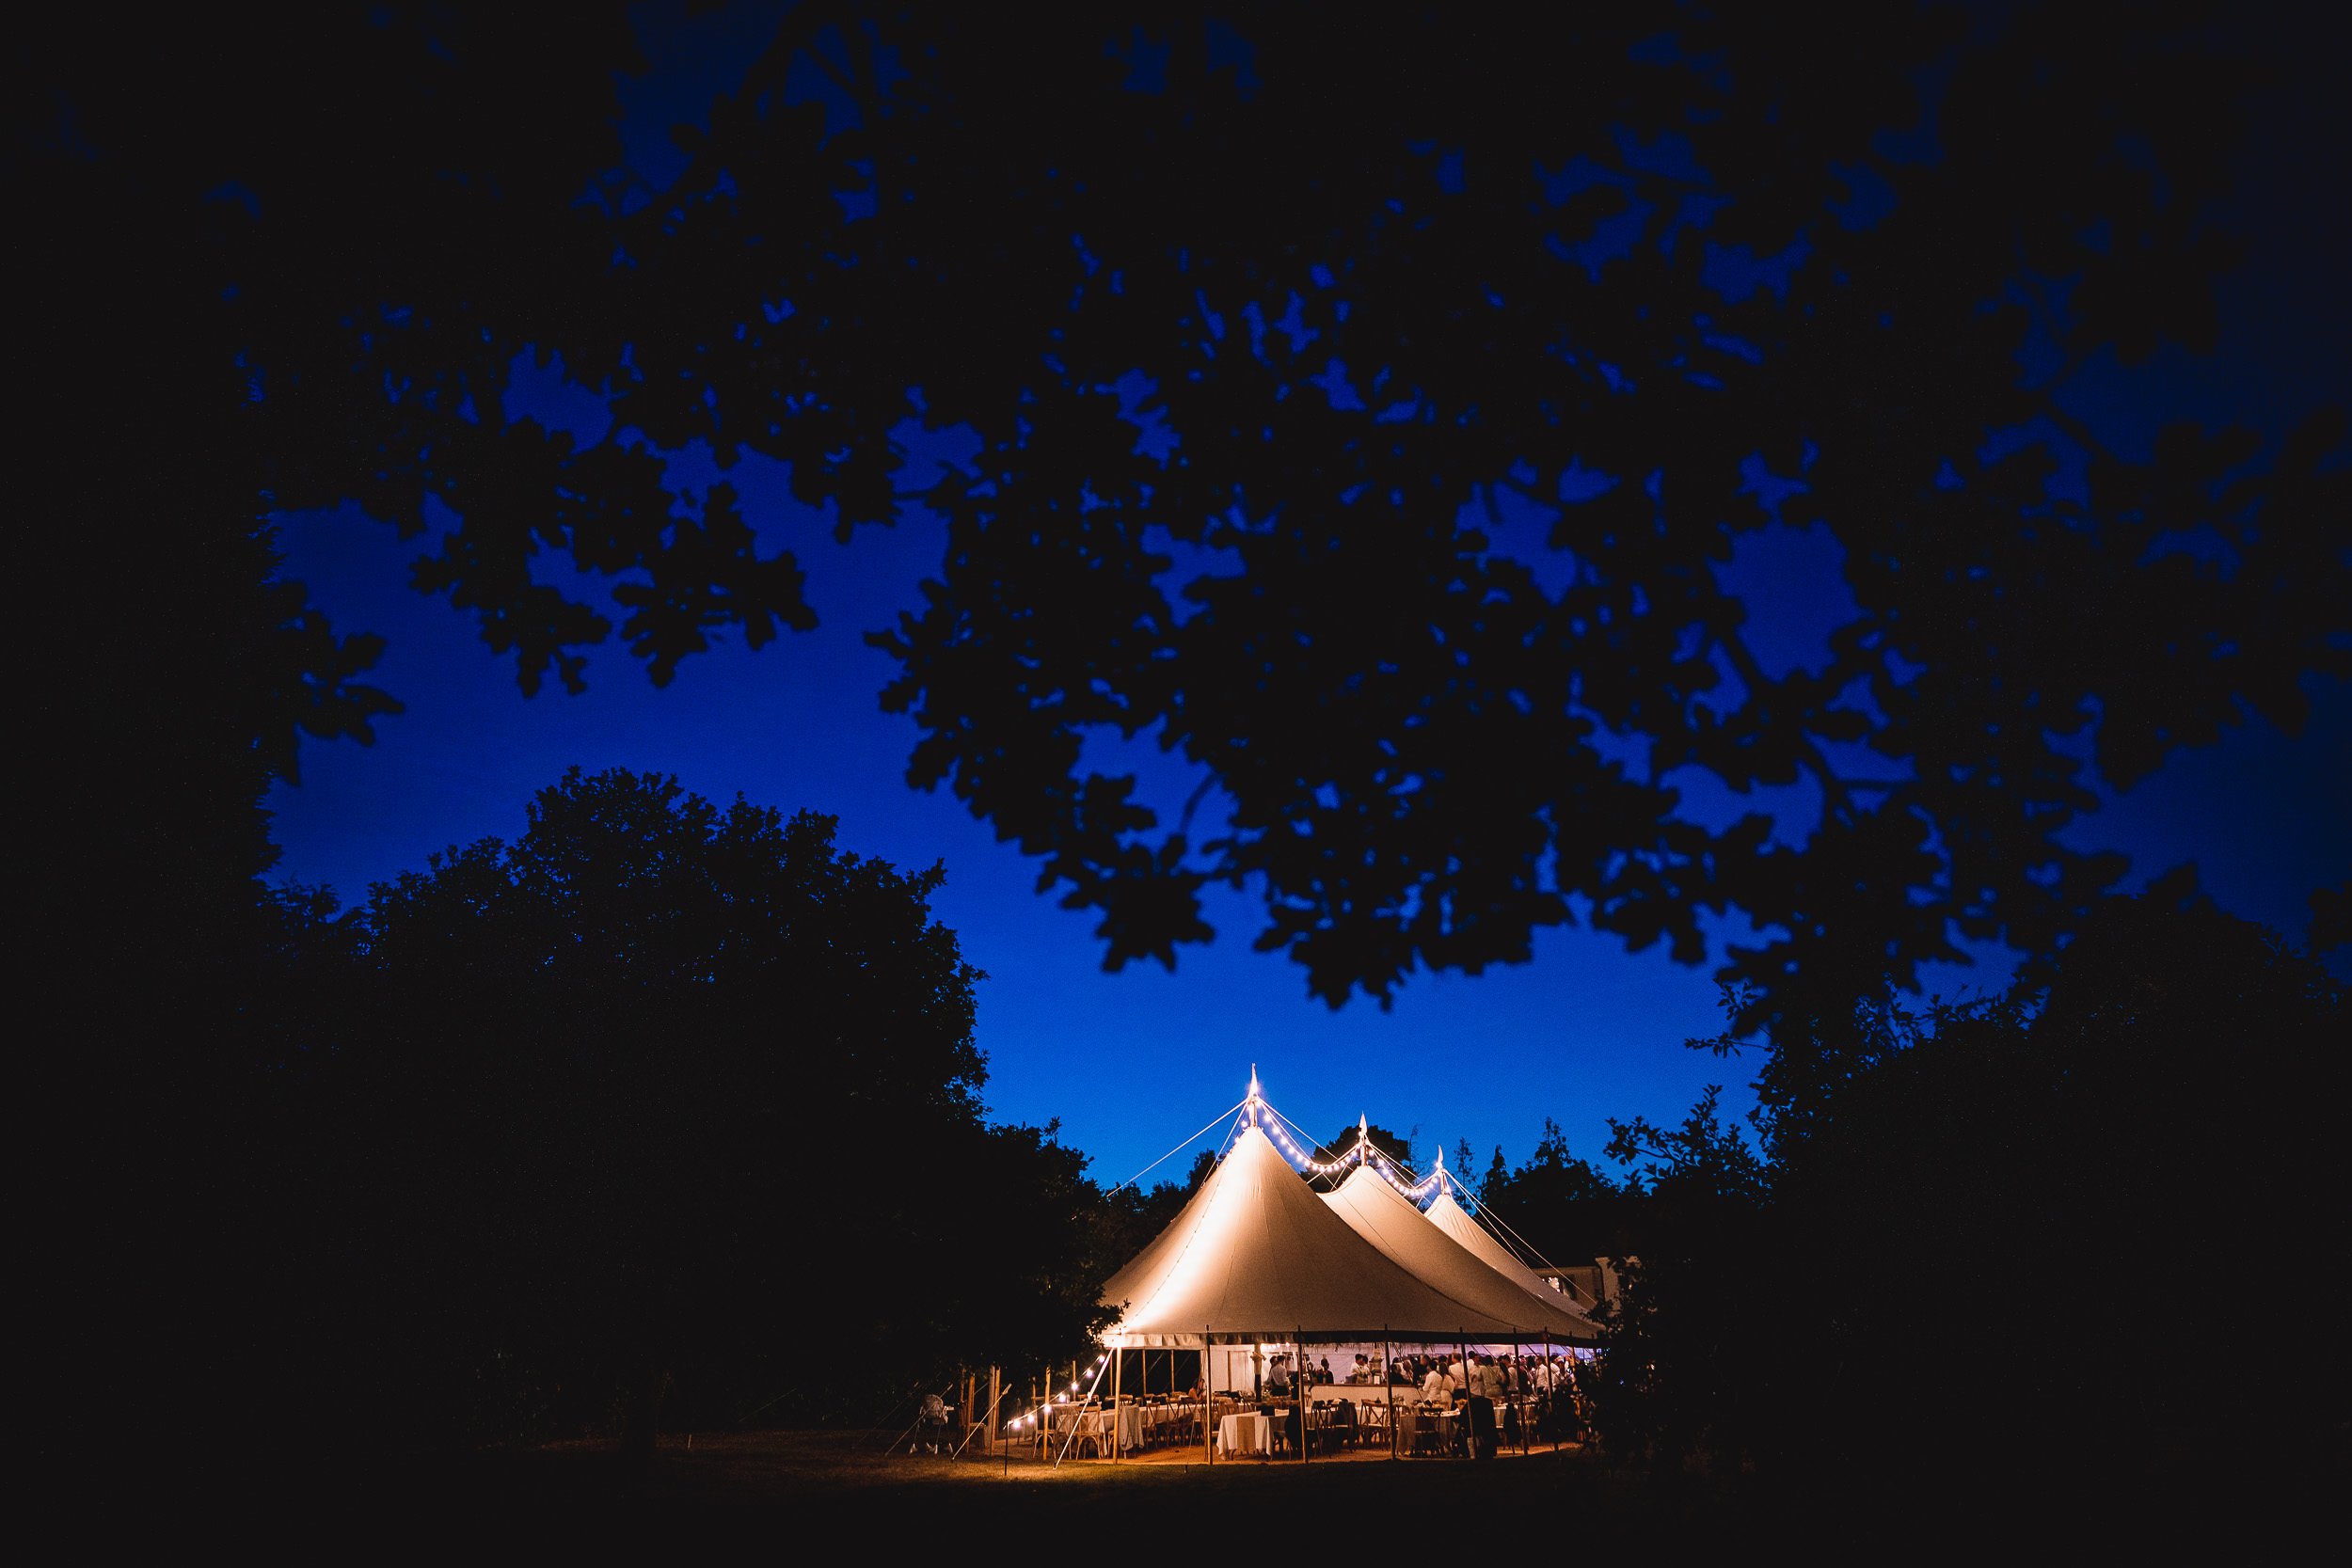 A wedding tent glowing in the nighttime forest, captured by a wedding photographer.